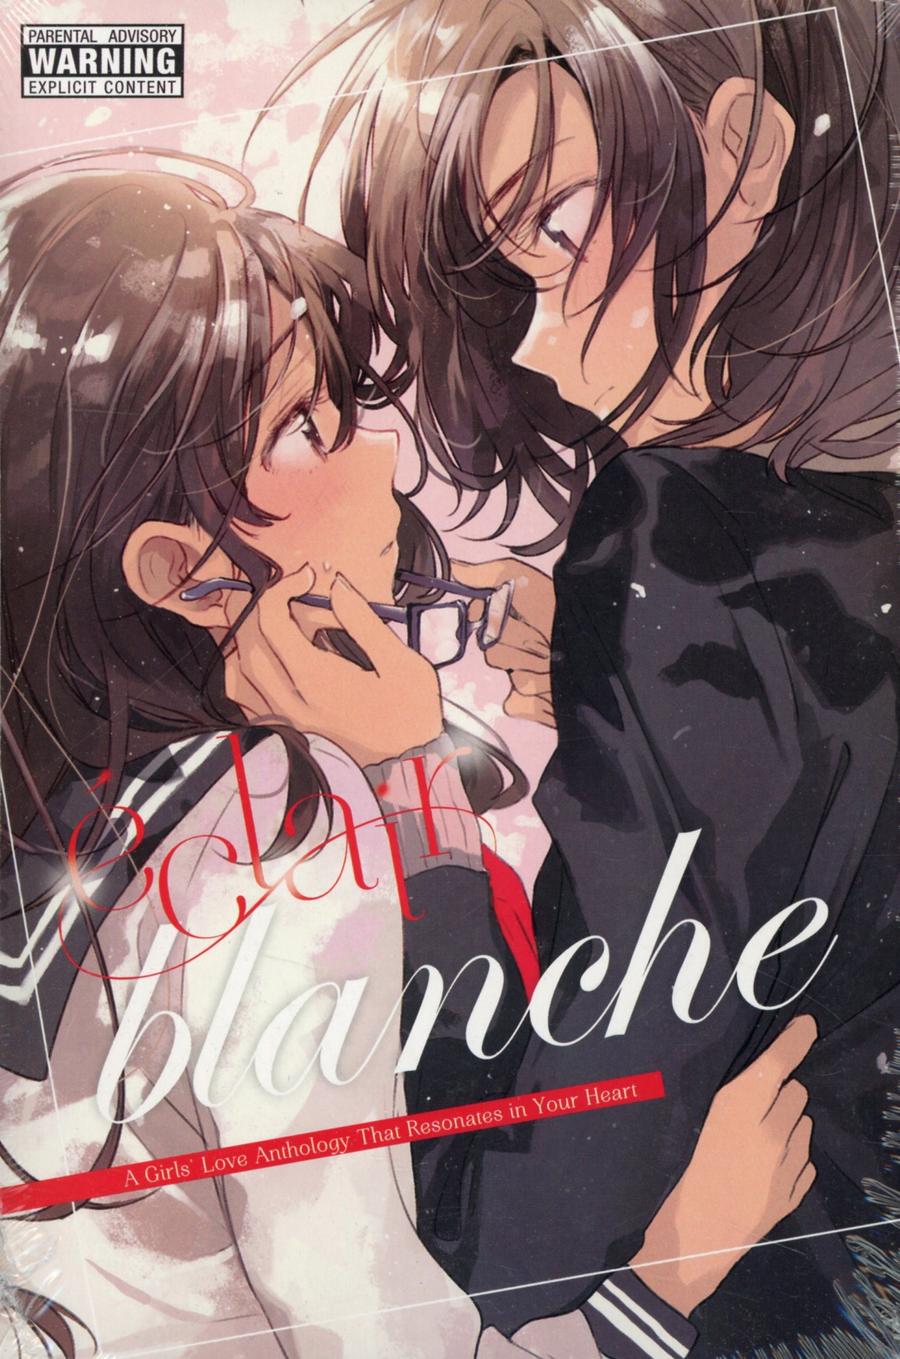 Eclair Blanche A Girls Love Anthology That Resonates In Your Heart GN